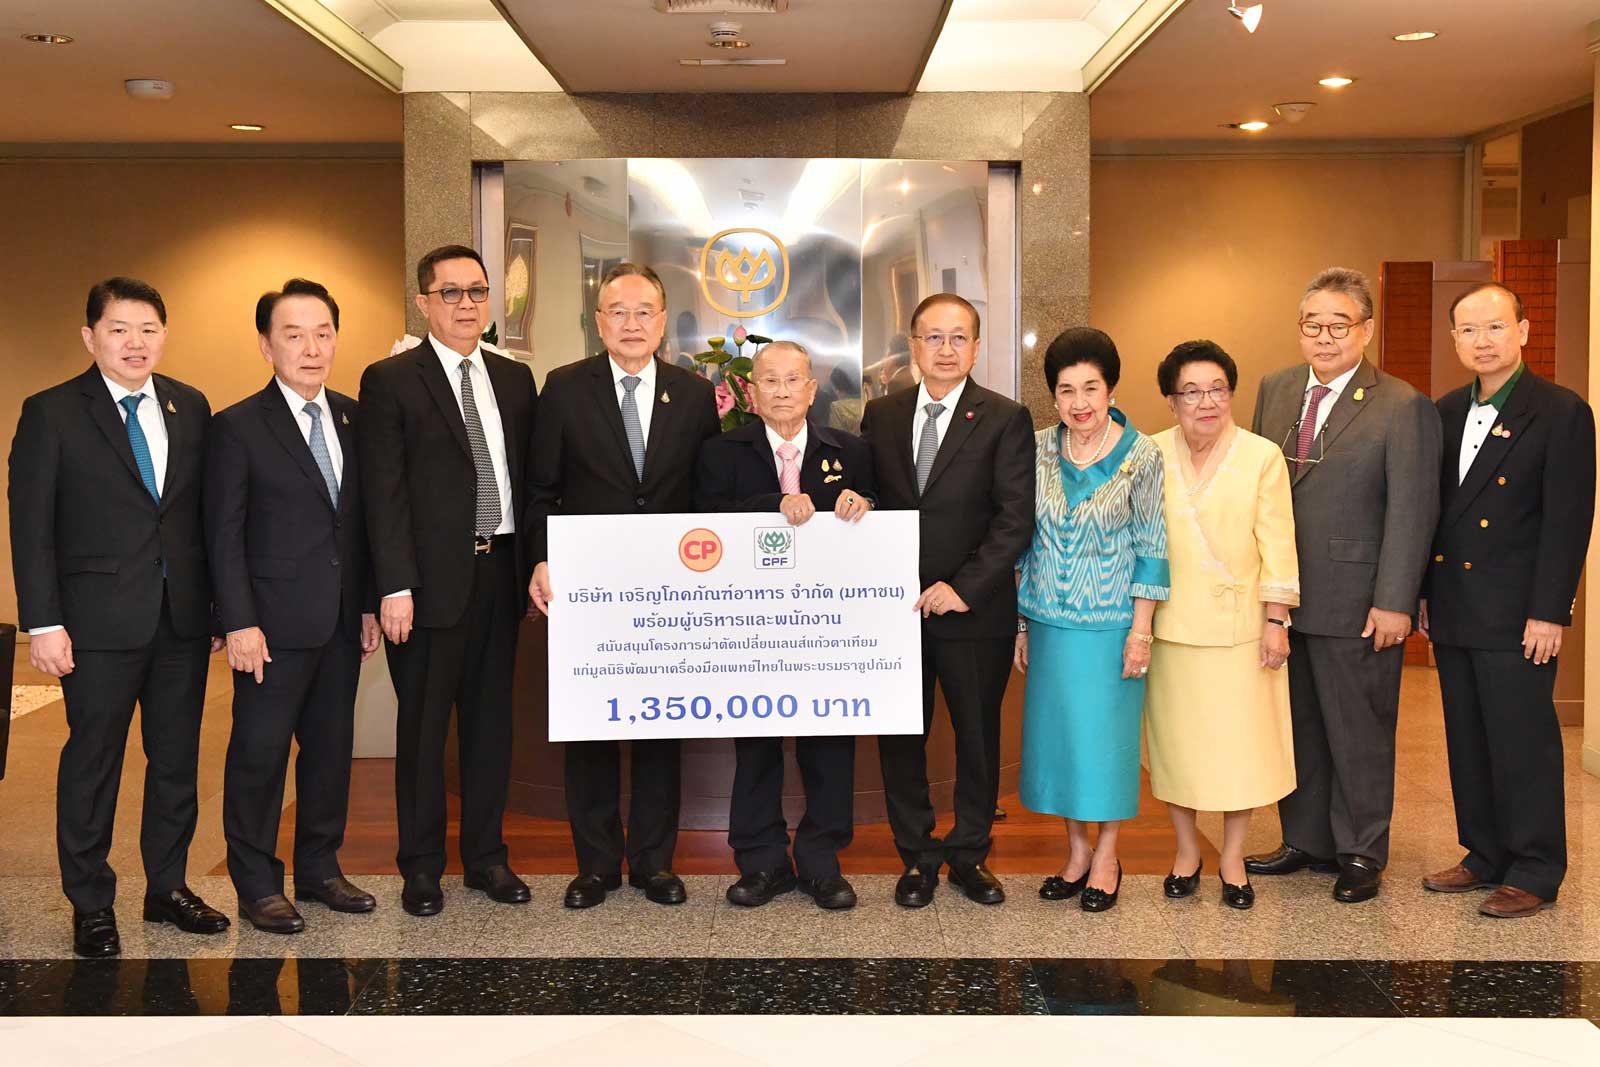 CPF donates to support lens replacement surgery